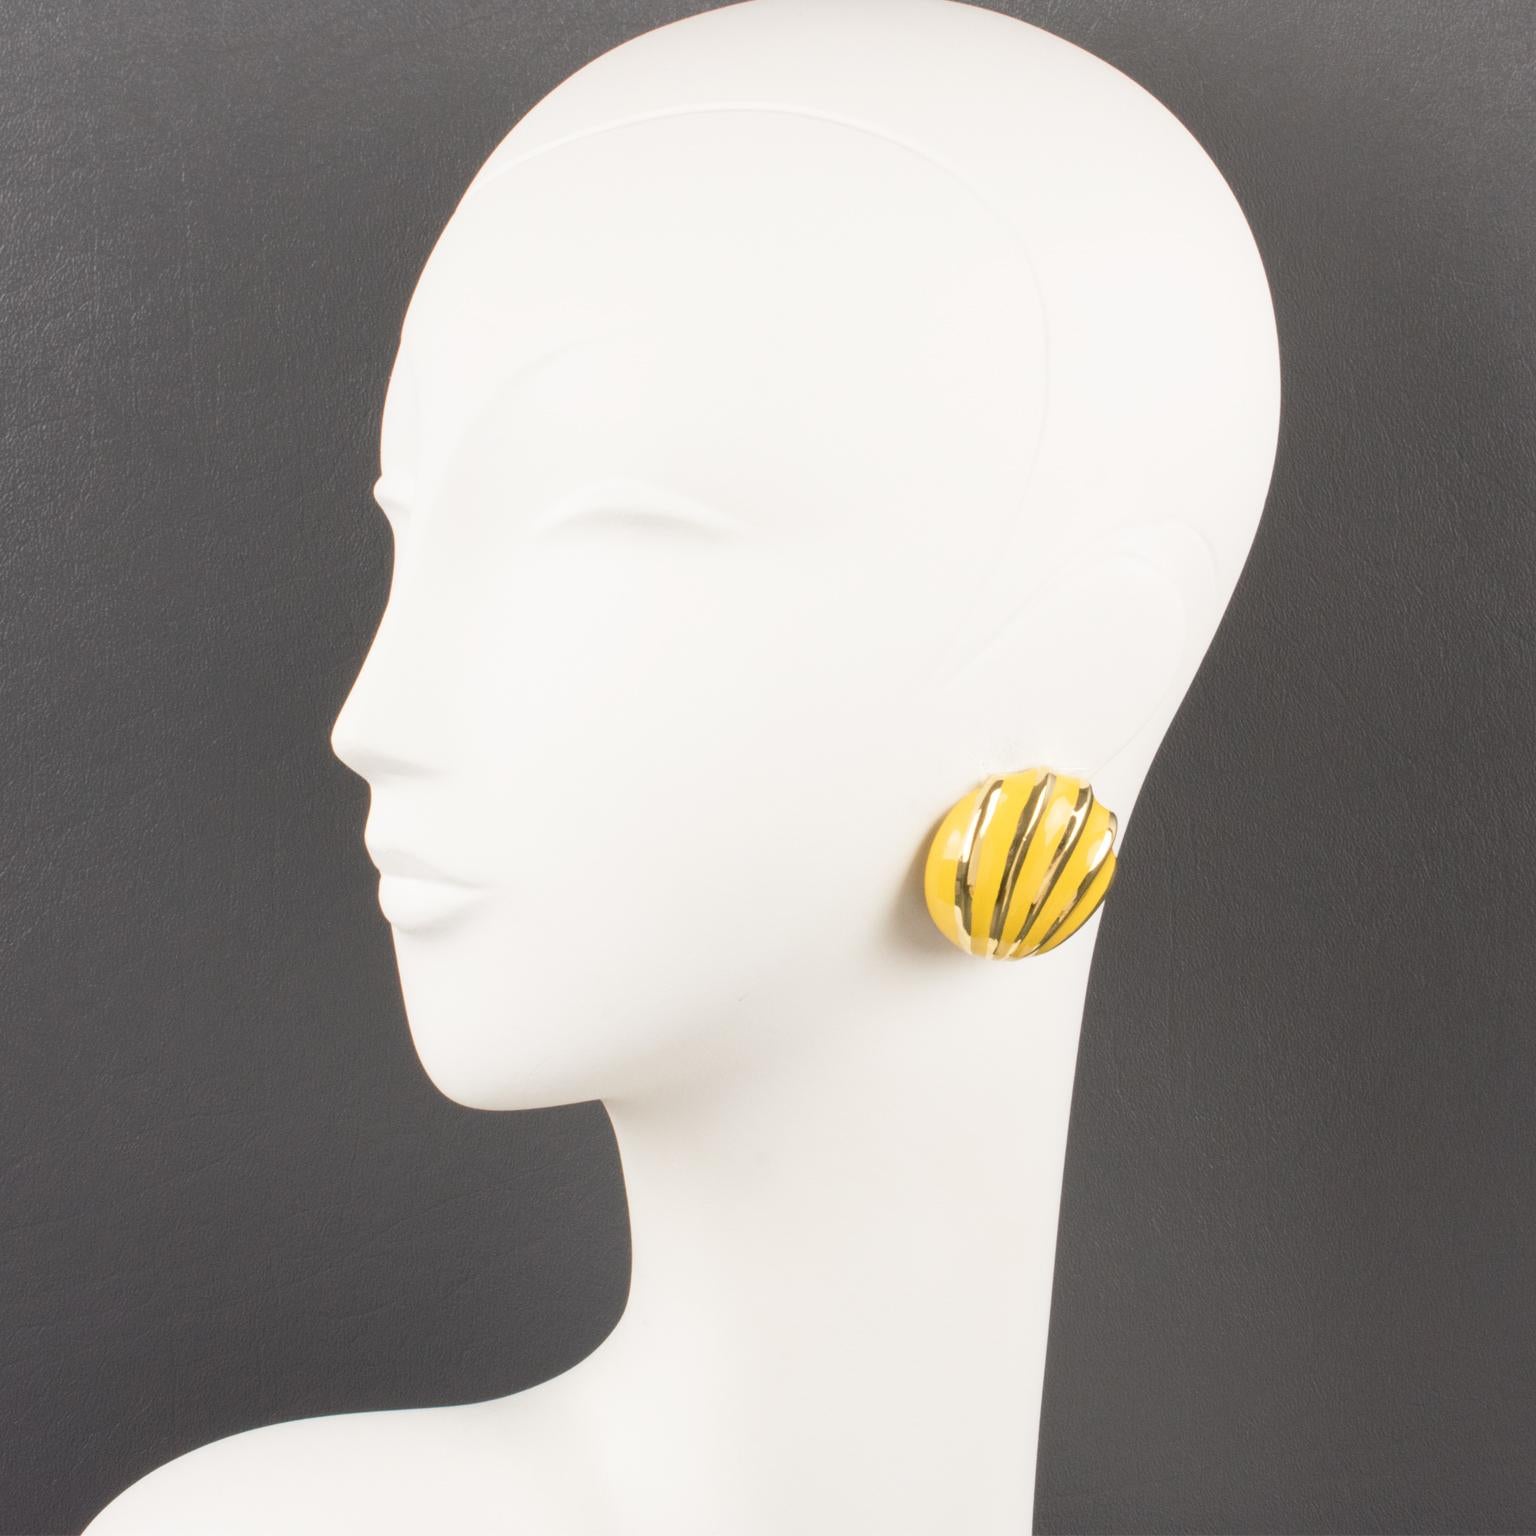 Lovely Valentino Garavani couture clip-on earrings. Dimensional rounded shape with shiny gilt metal contrasted with yellow enamel in a seashell striped design. Valentino hallmark underside.
Measurements: 1.44 in. diameter (3.7 cm).